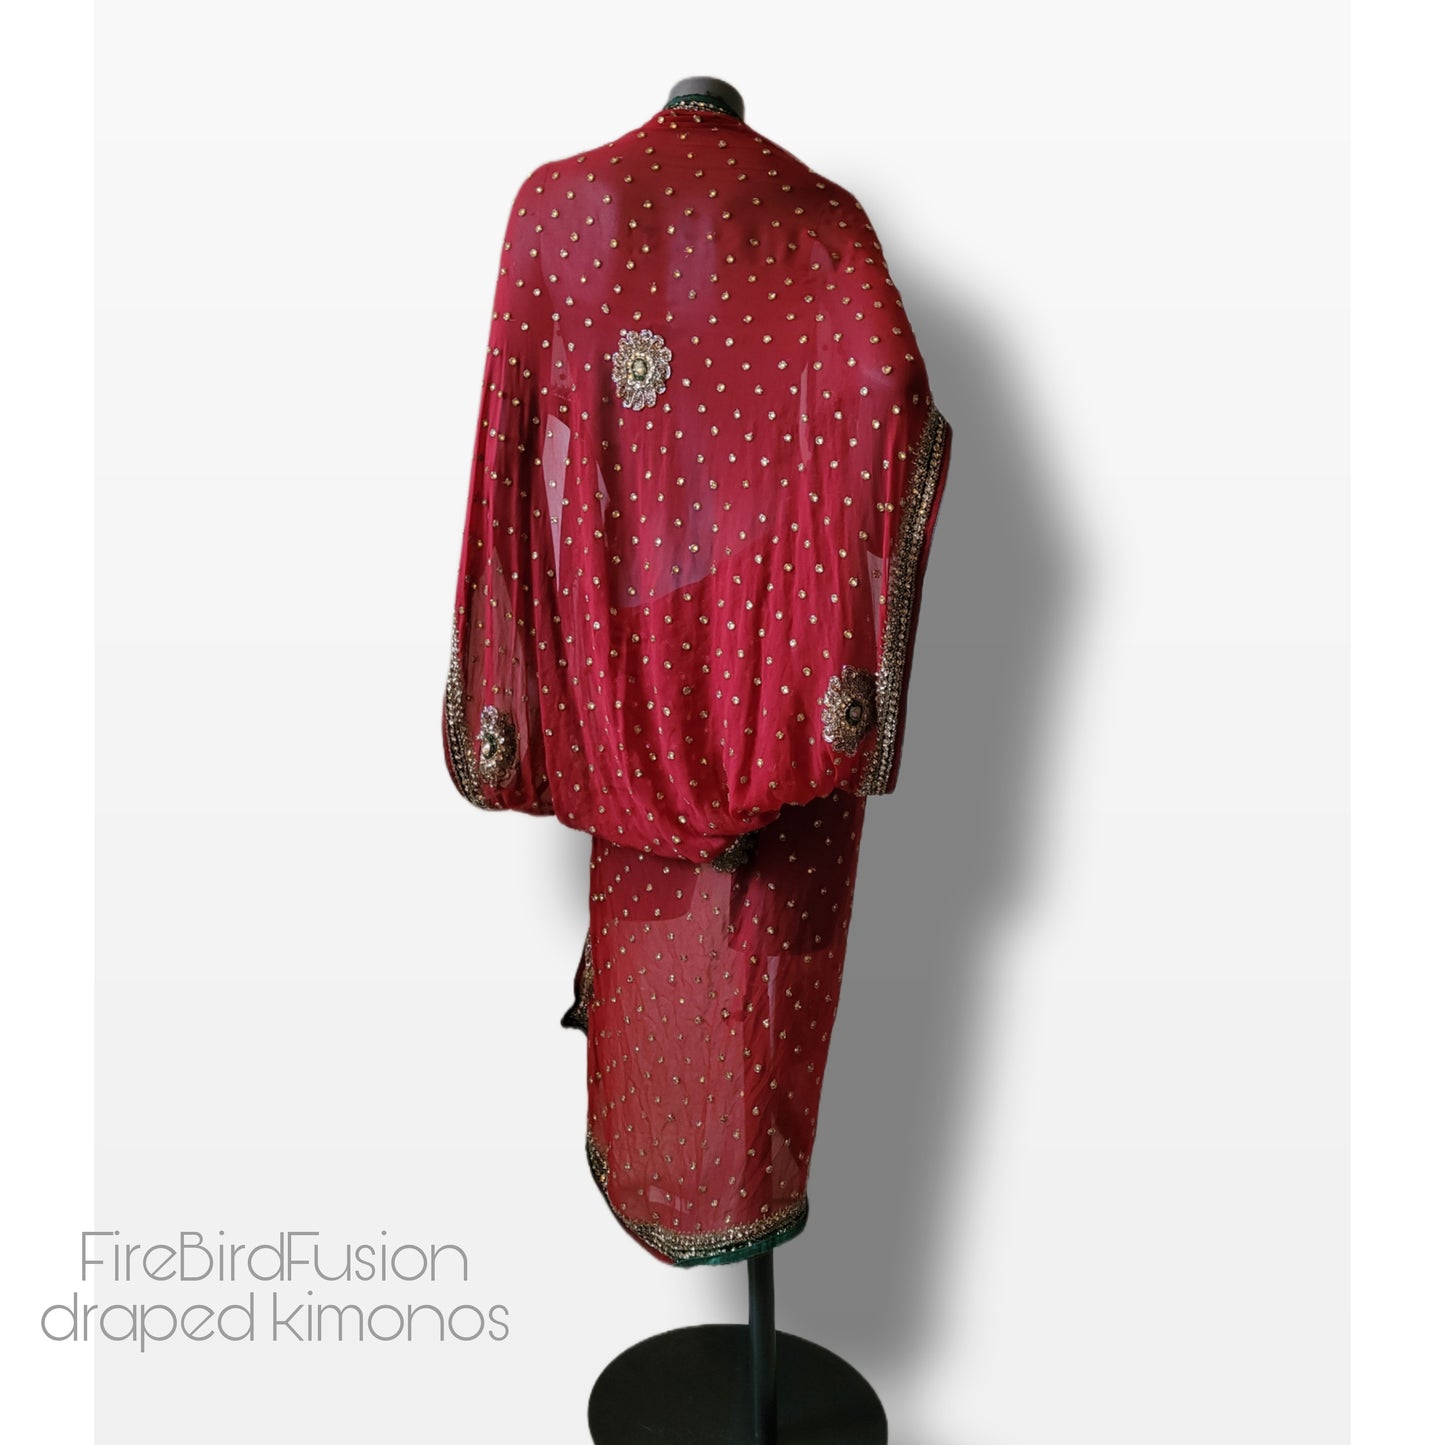 Draped kimono, red with green velvet inlays, hand embrodery with pale golden glass beads and green lined trim (S)